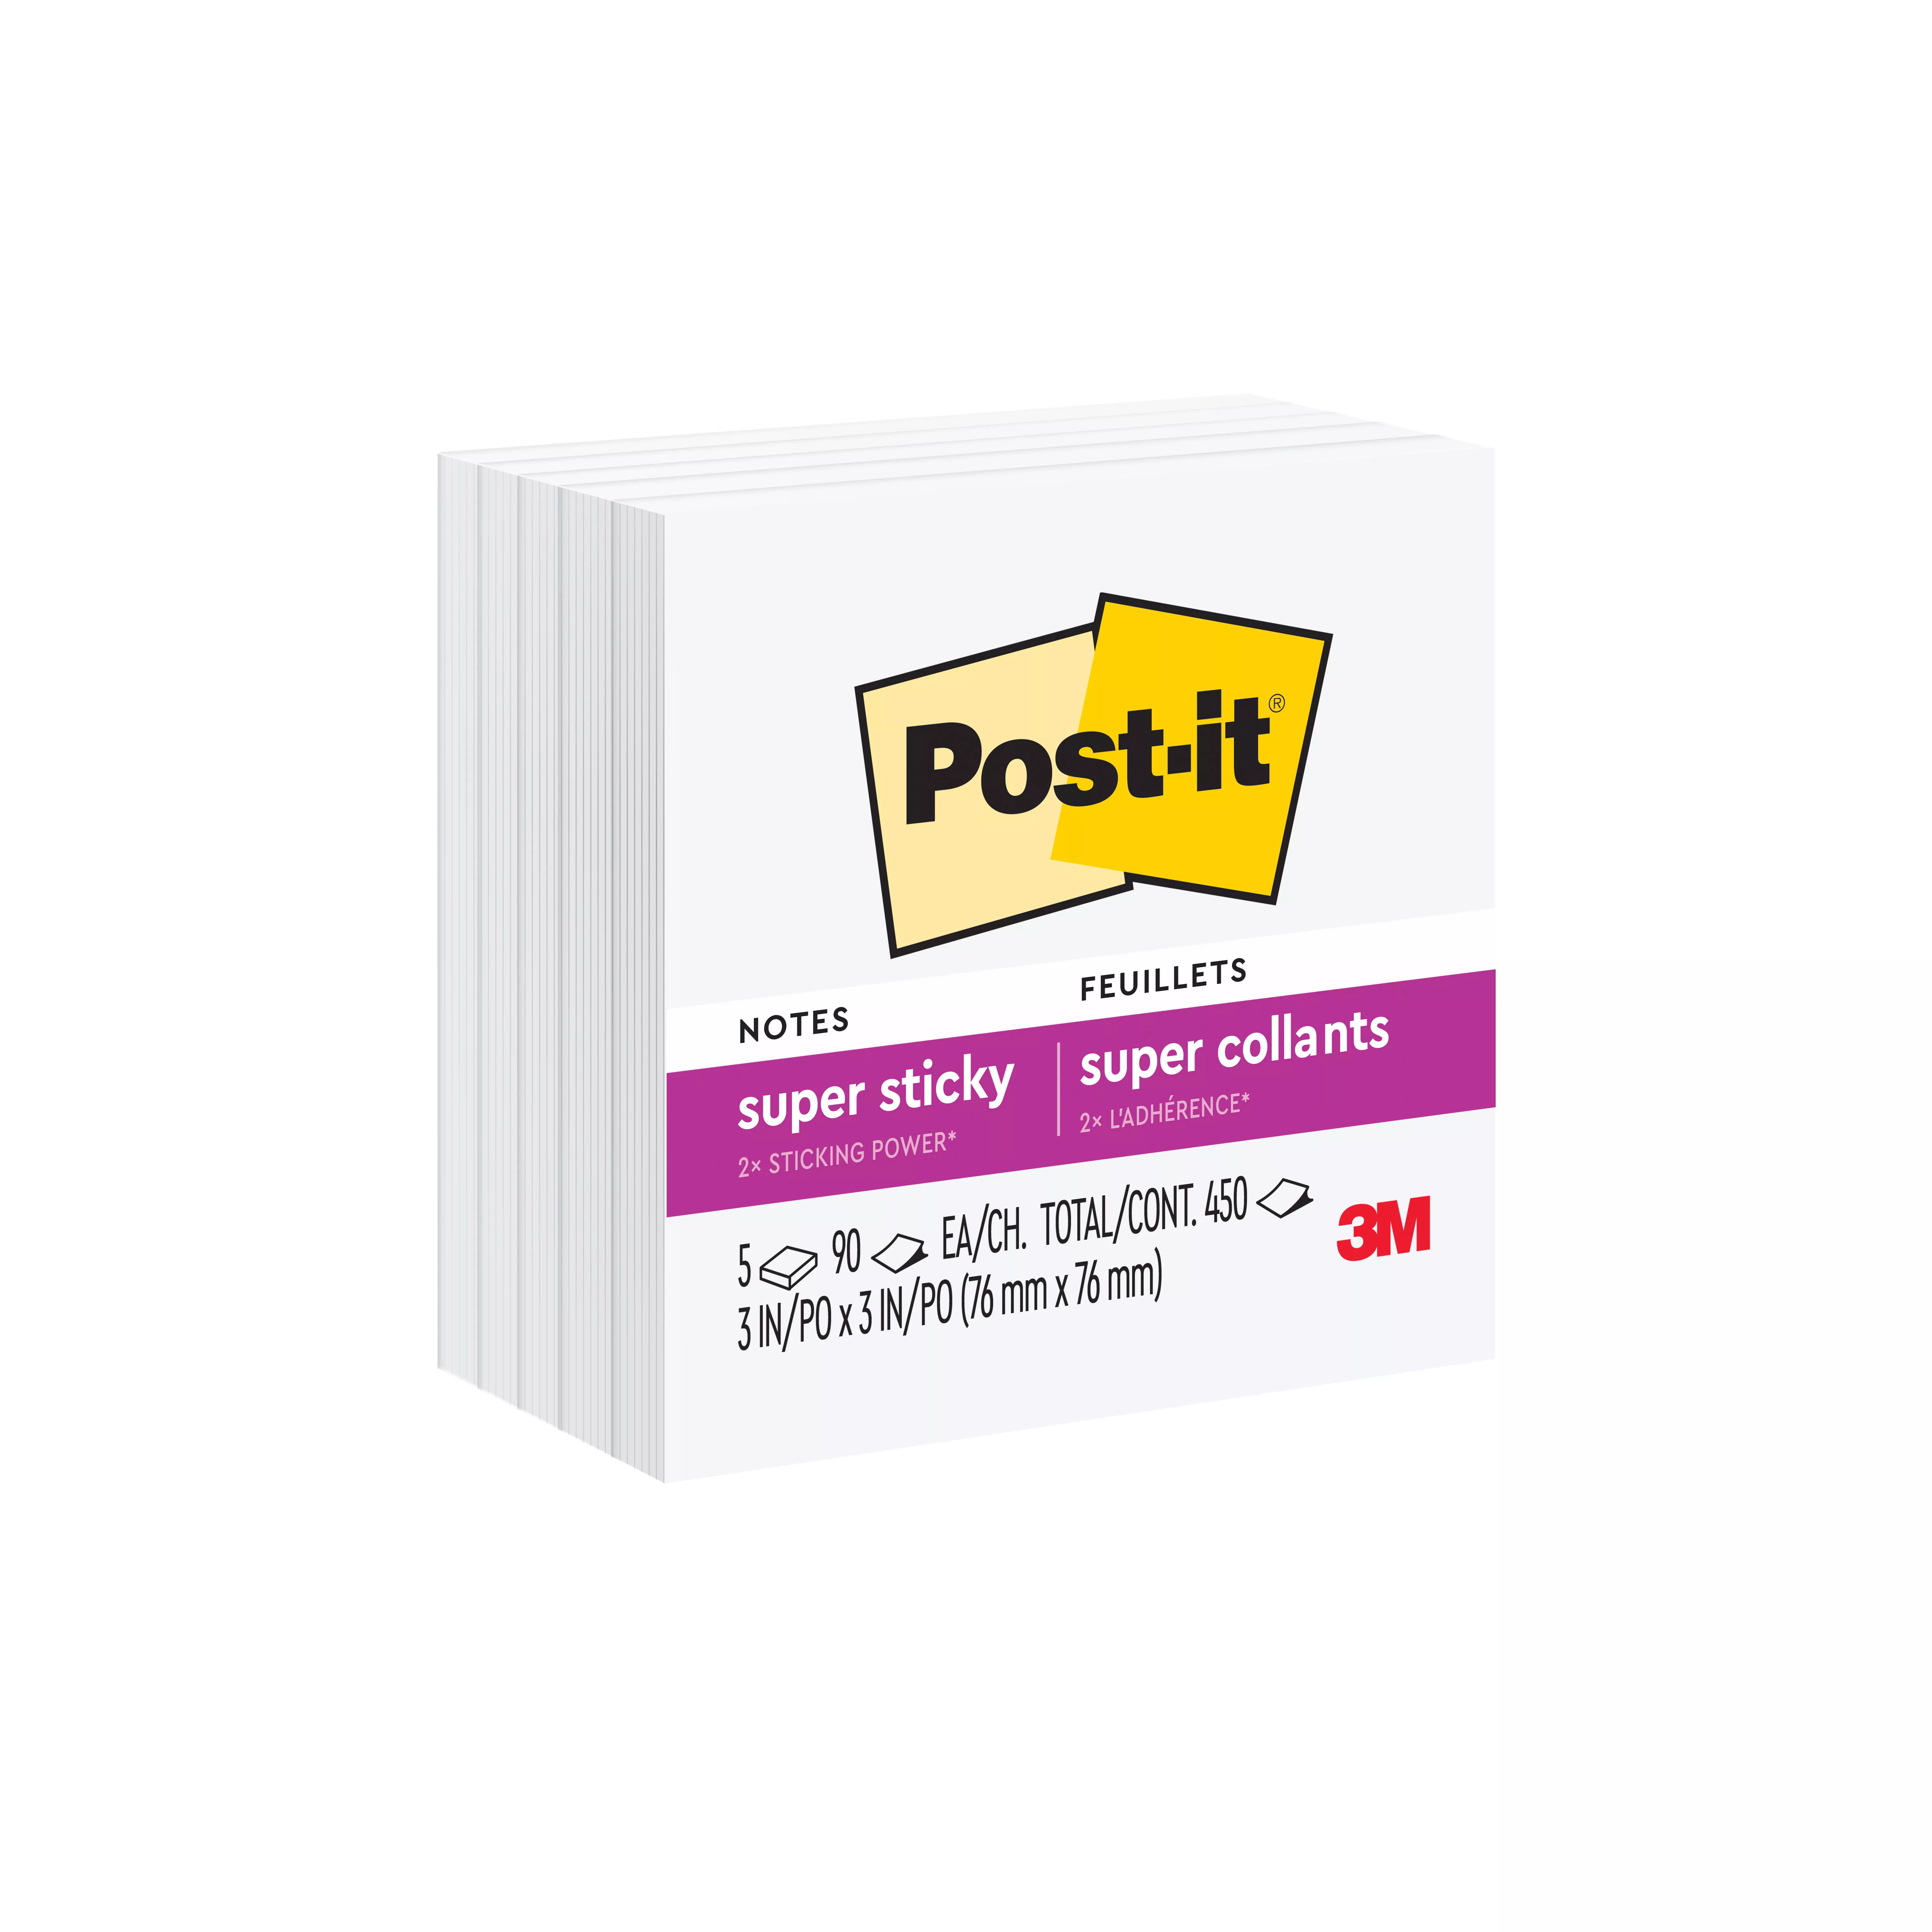 Post-it® Super Sticky Notes 654-5SSW, 3 in x 3 in (76 mm x 76 mm),
White, 5 Pads/Pack, 90 Sheets/Pad